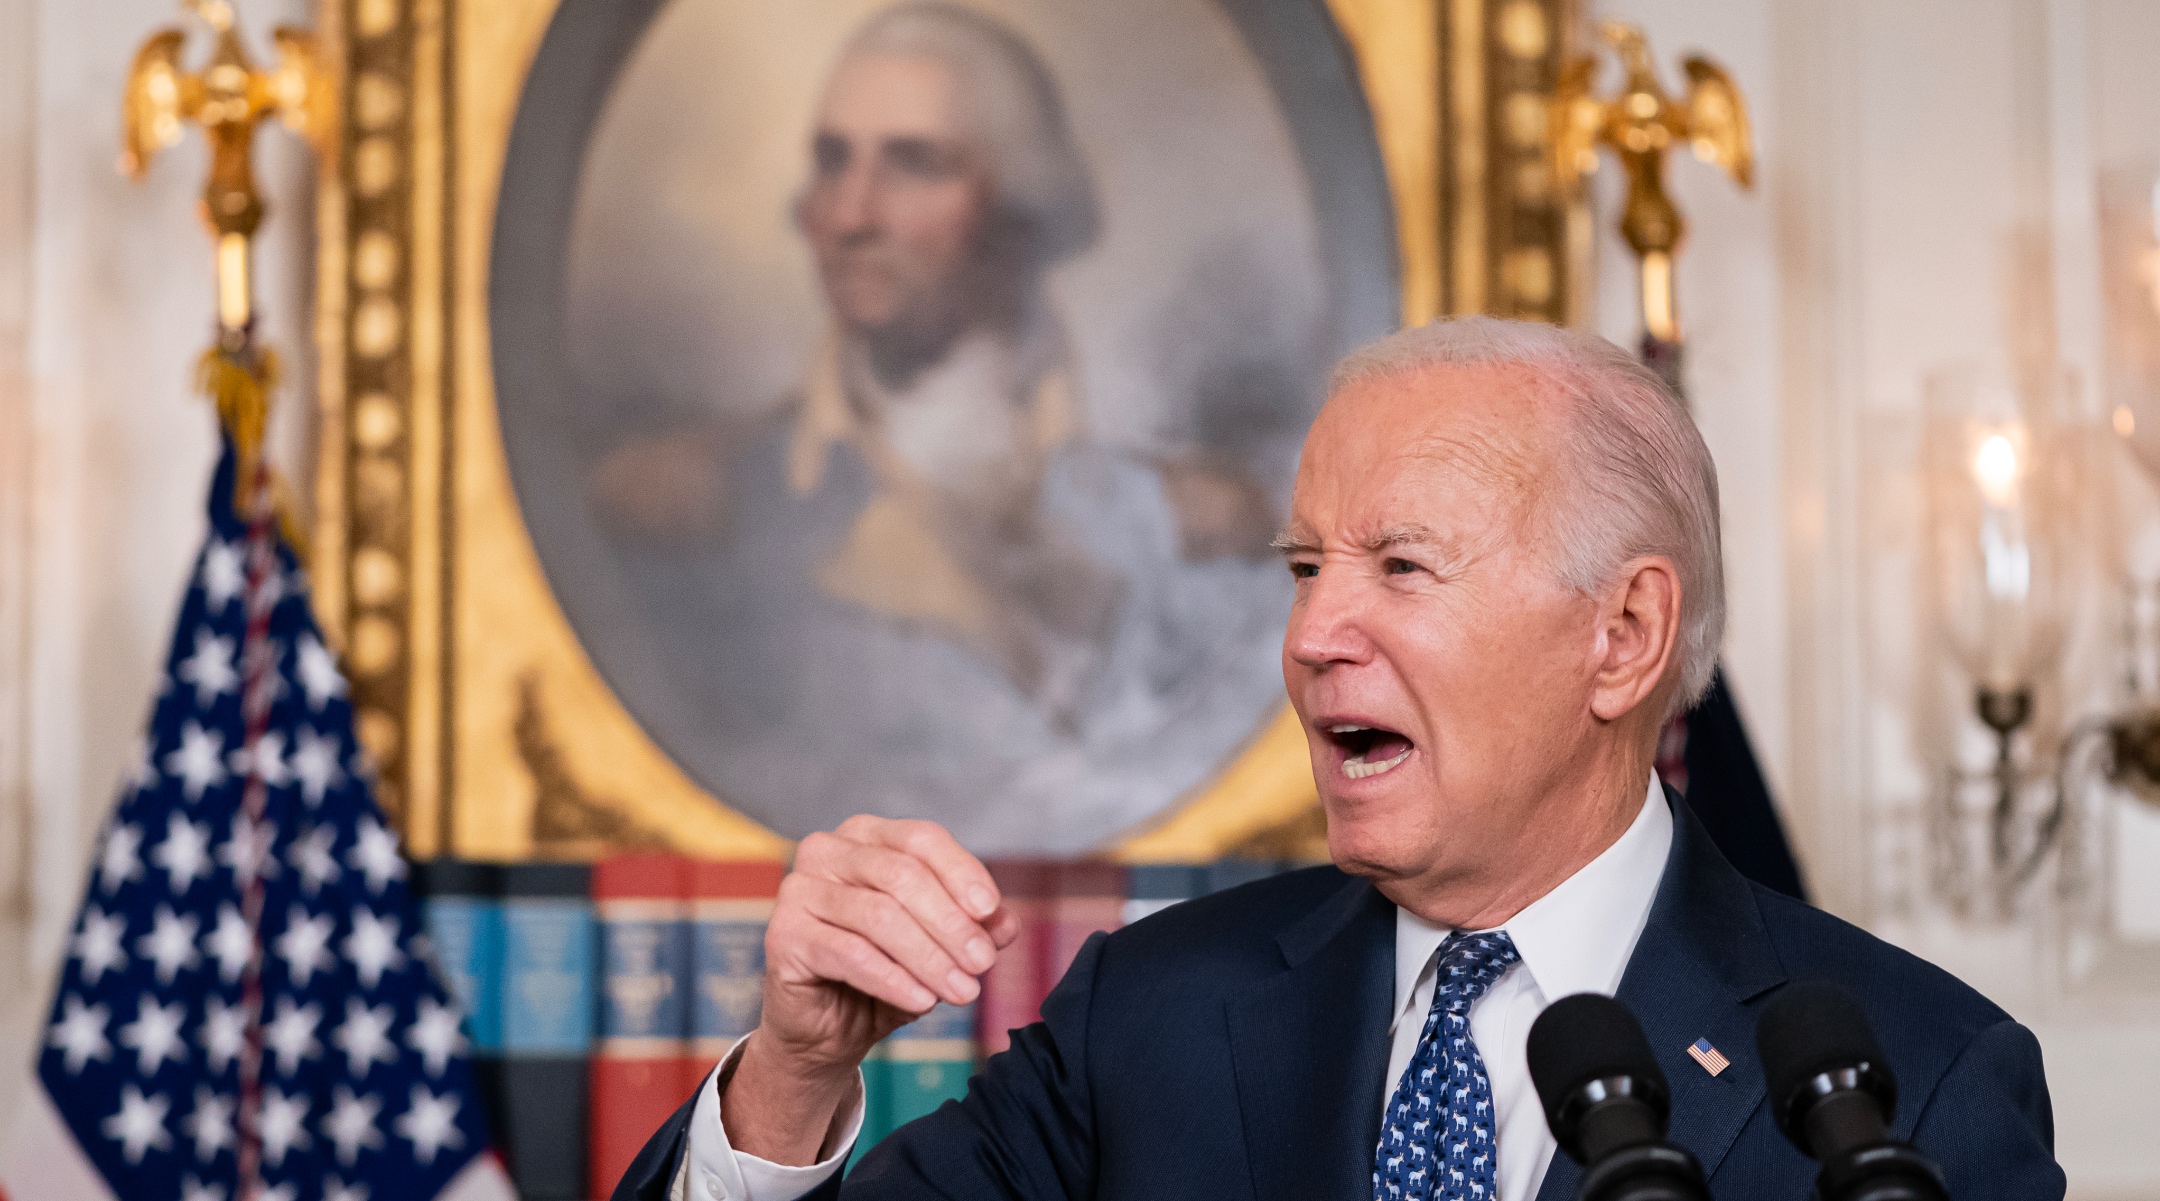 Republicans accuse Biden of jeopardizing Israel's security (Credits: Getty Images)